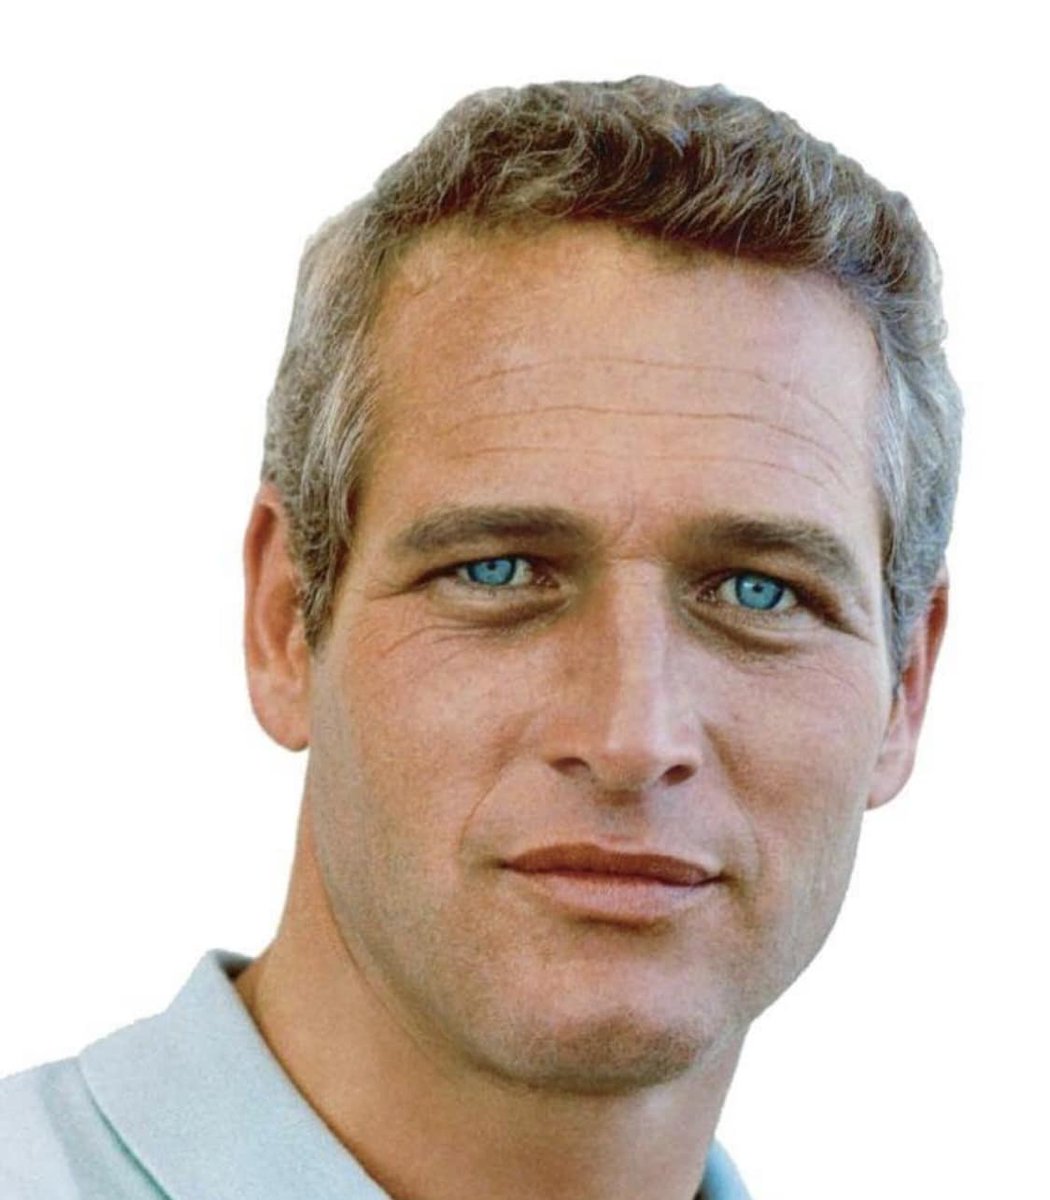 Paul Newman was a ferociously proud Jew. Newman’s father read the daily Cleveland Jewish newspaper. His parents were lifelong members of the local Jewish country club, and they kept their synagogue seats for life so they could be buried in the Jewish cemetery. When Newman’s